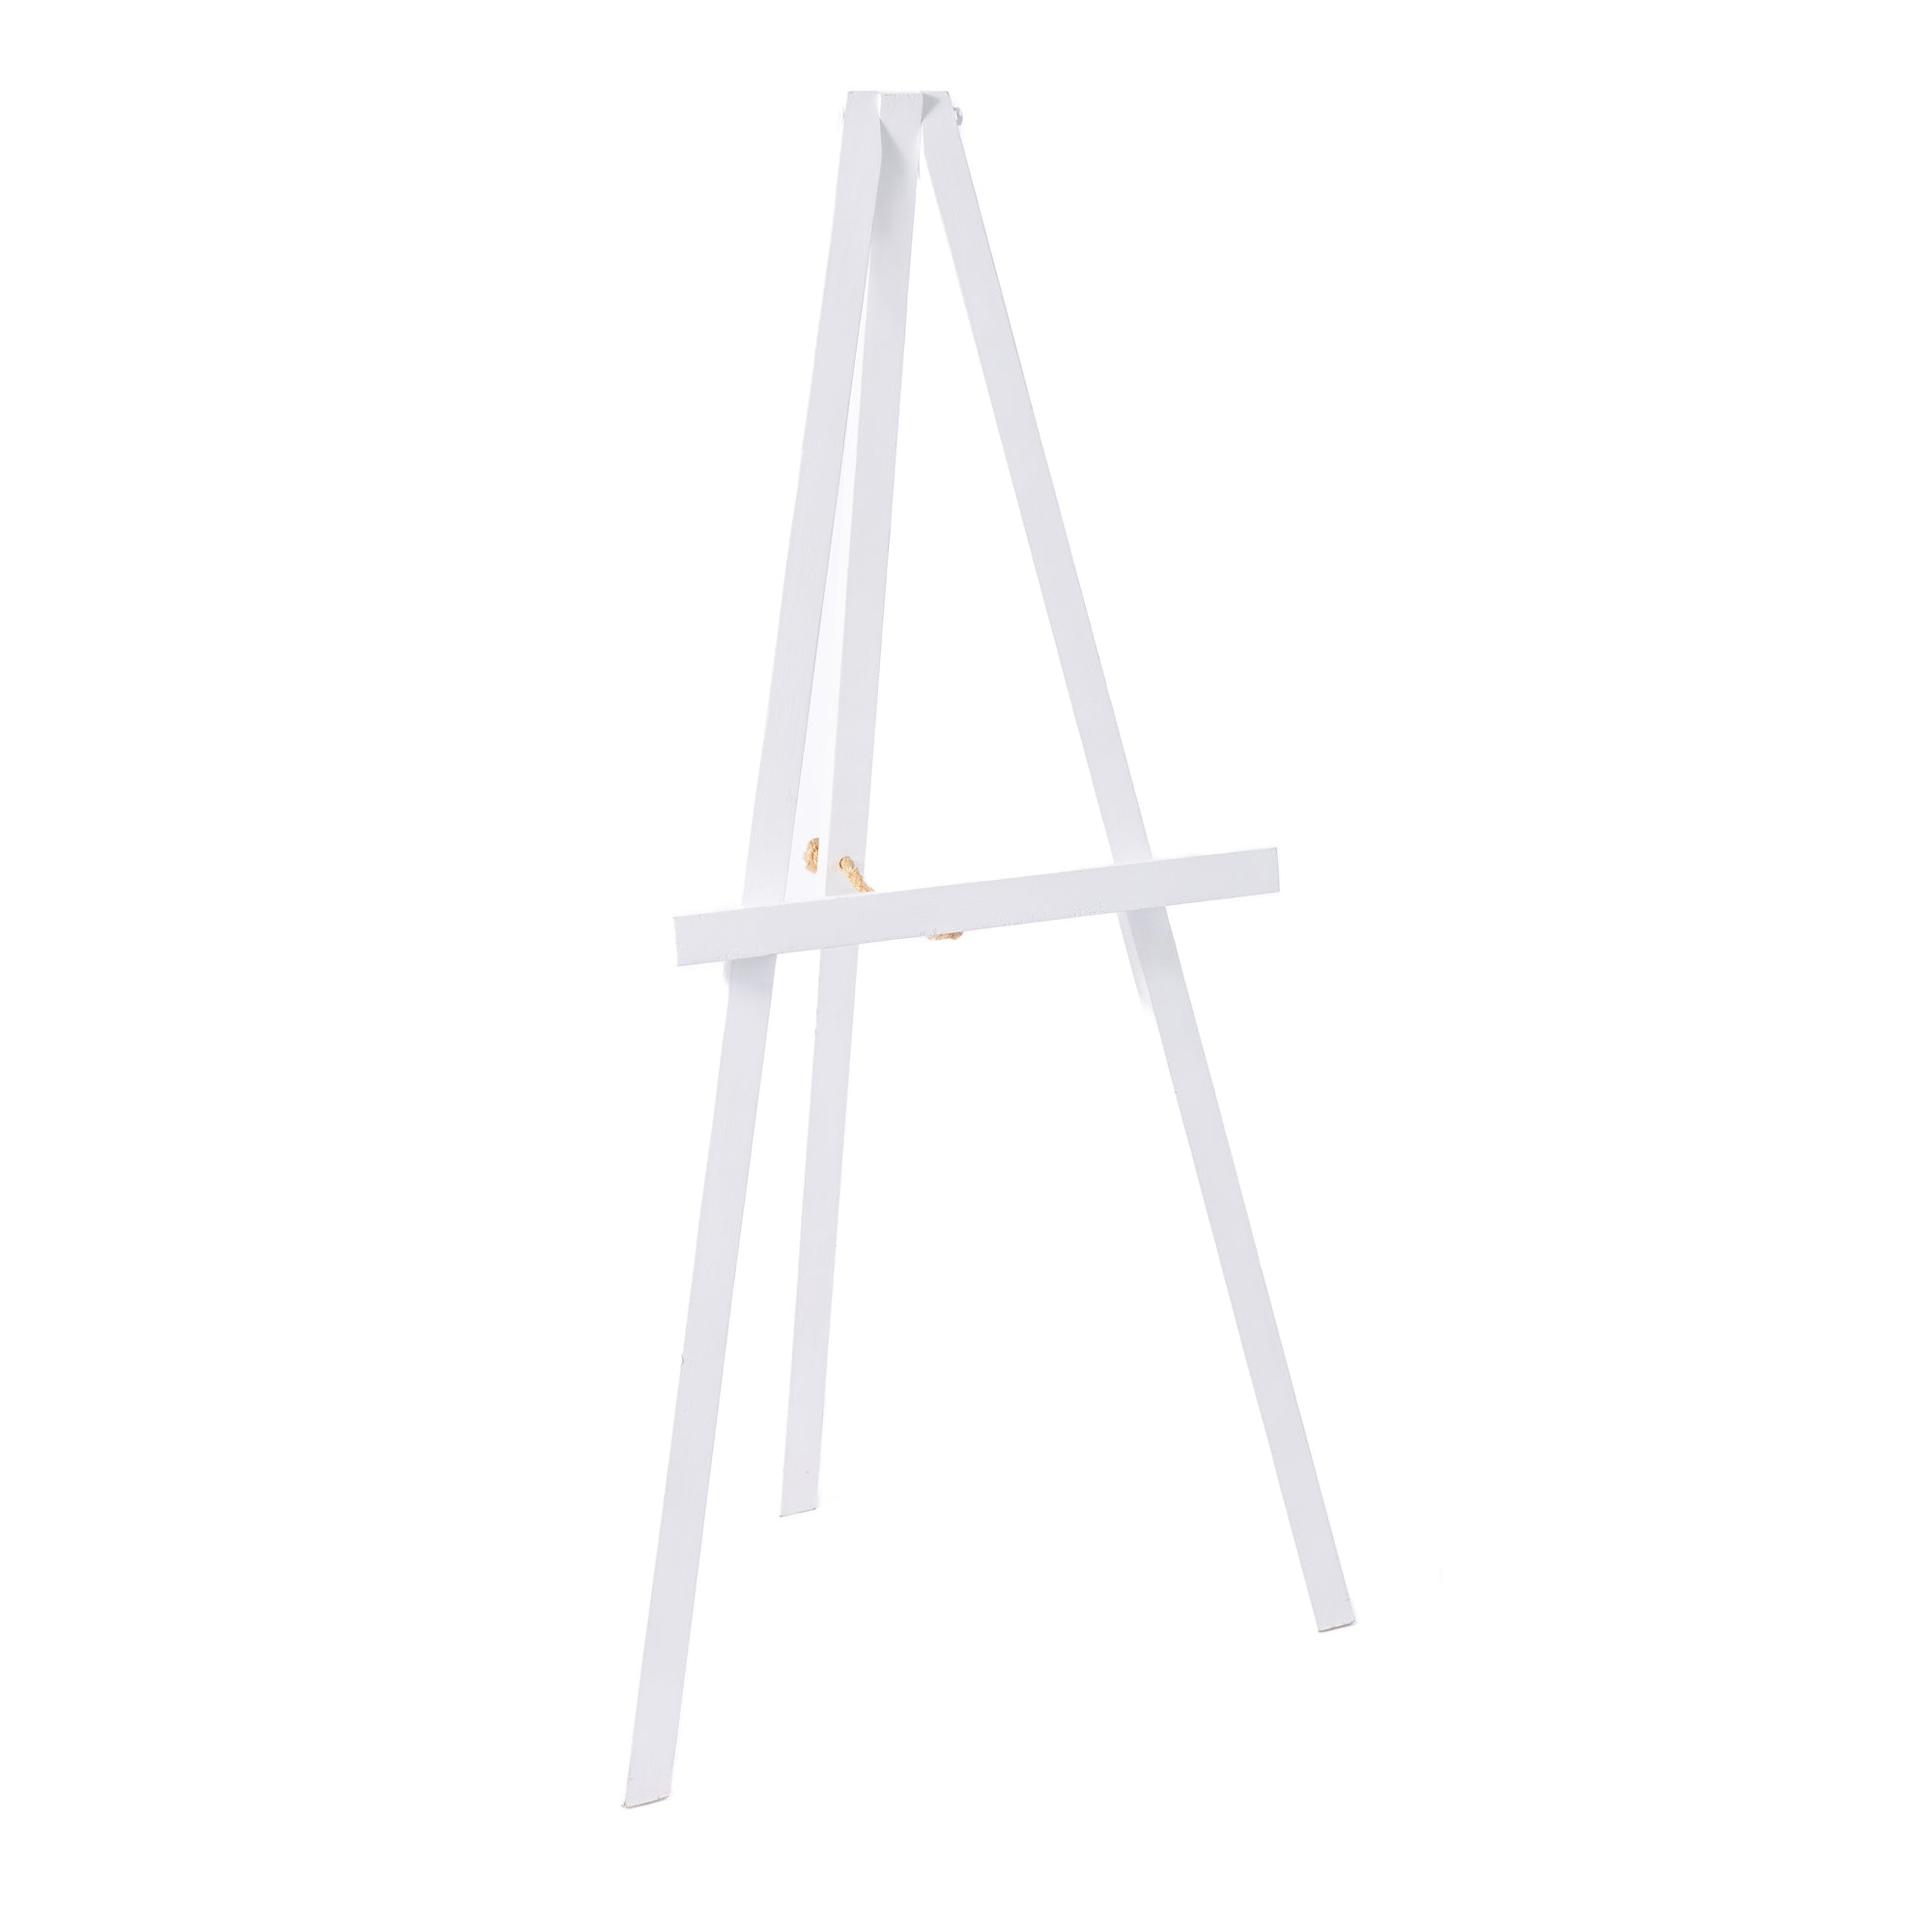 White Easel For Displaying Wedding Signage for Hire | For Love & Living Gold Coast Wedding & Events